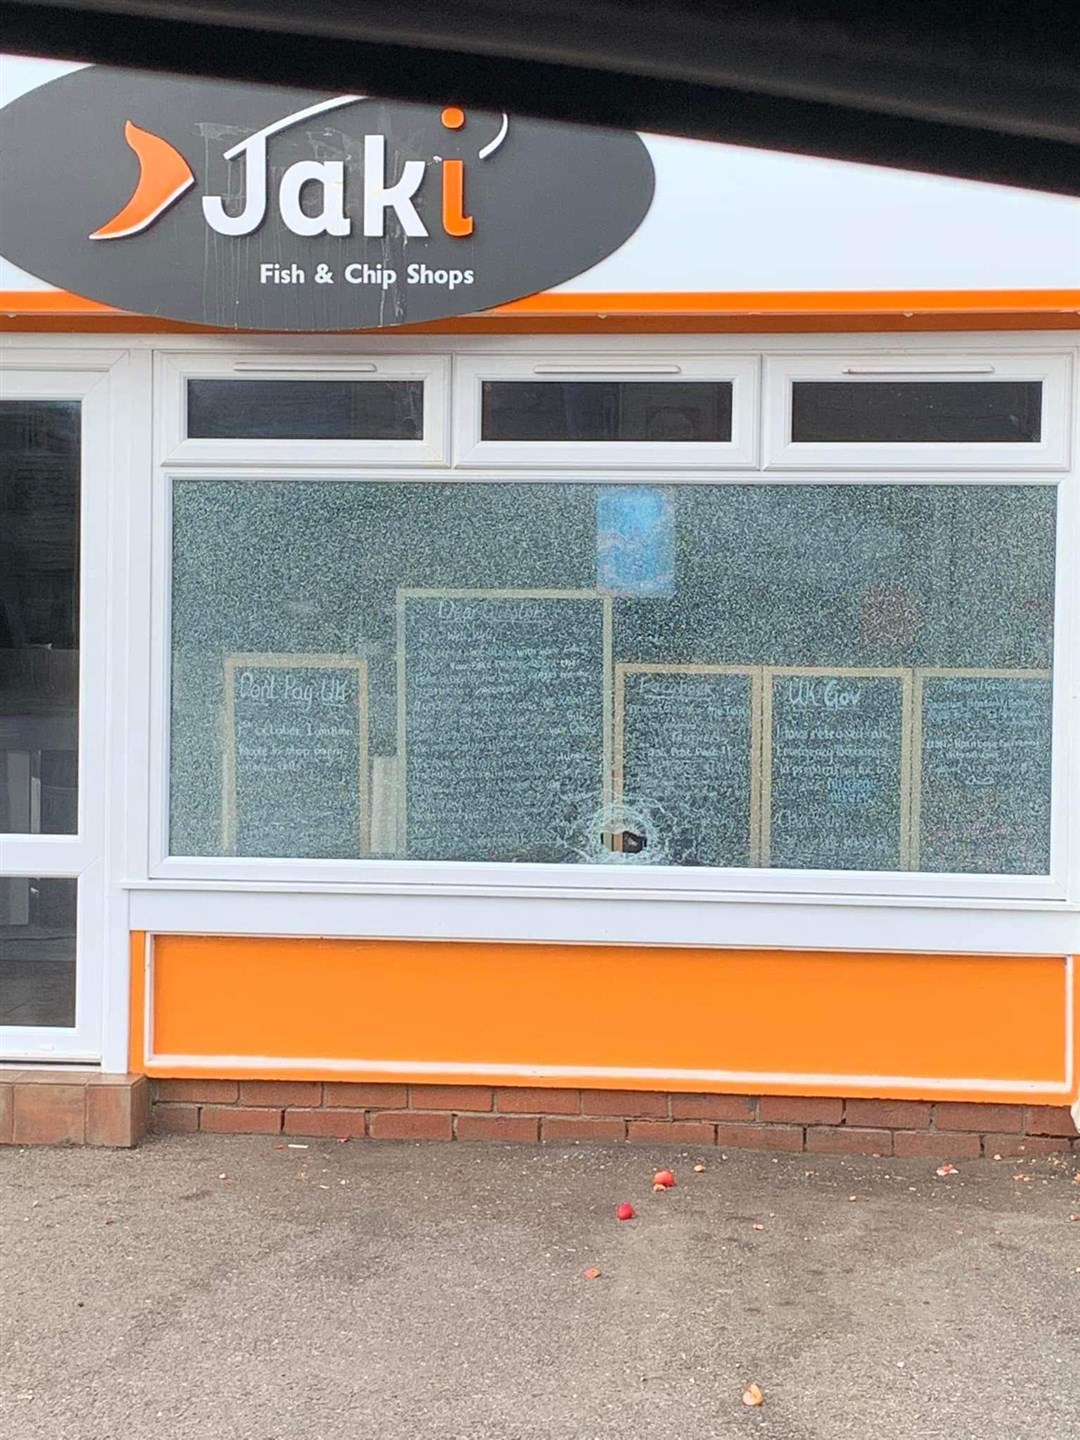 The window of the fish and chip shop was smashed.